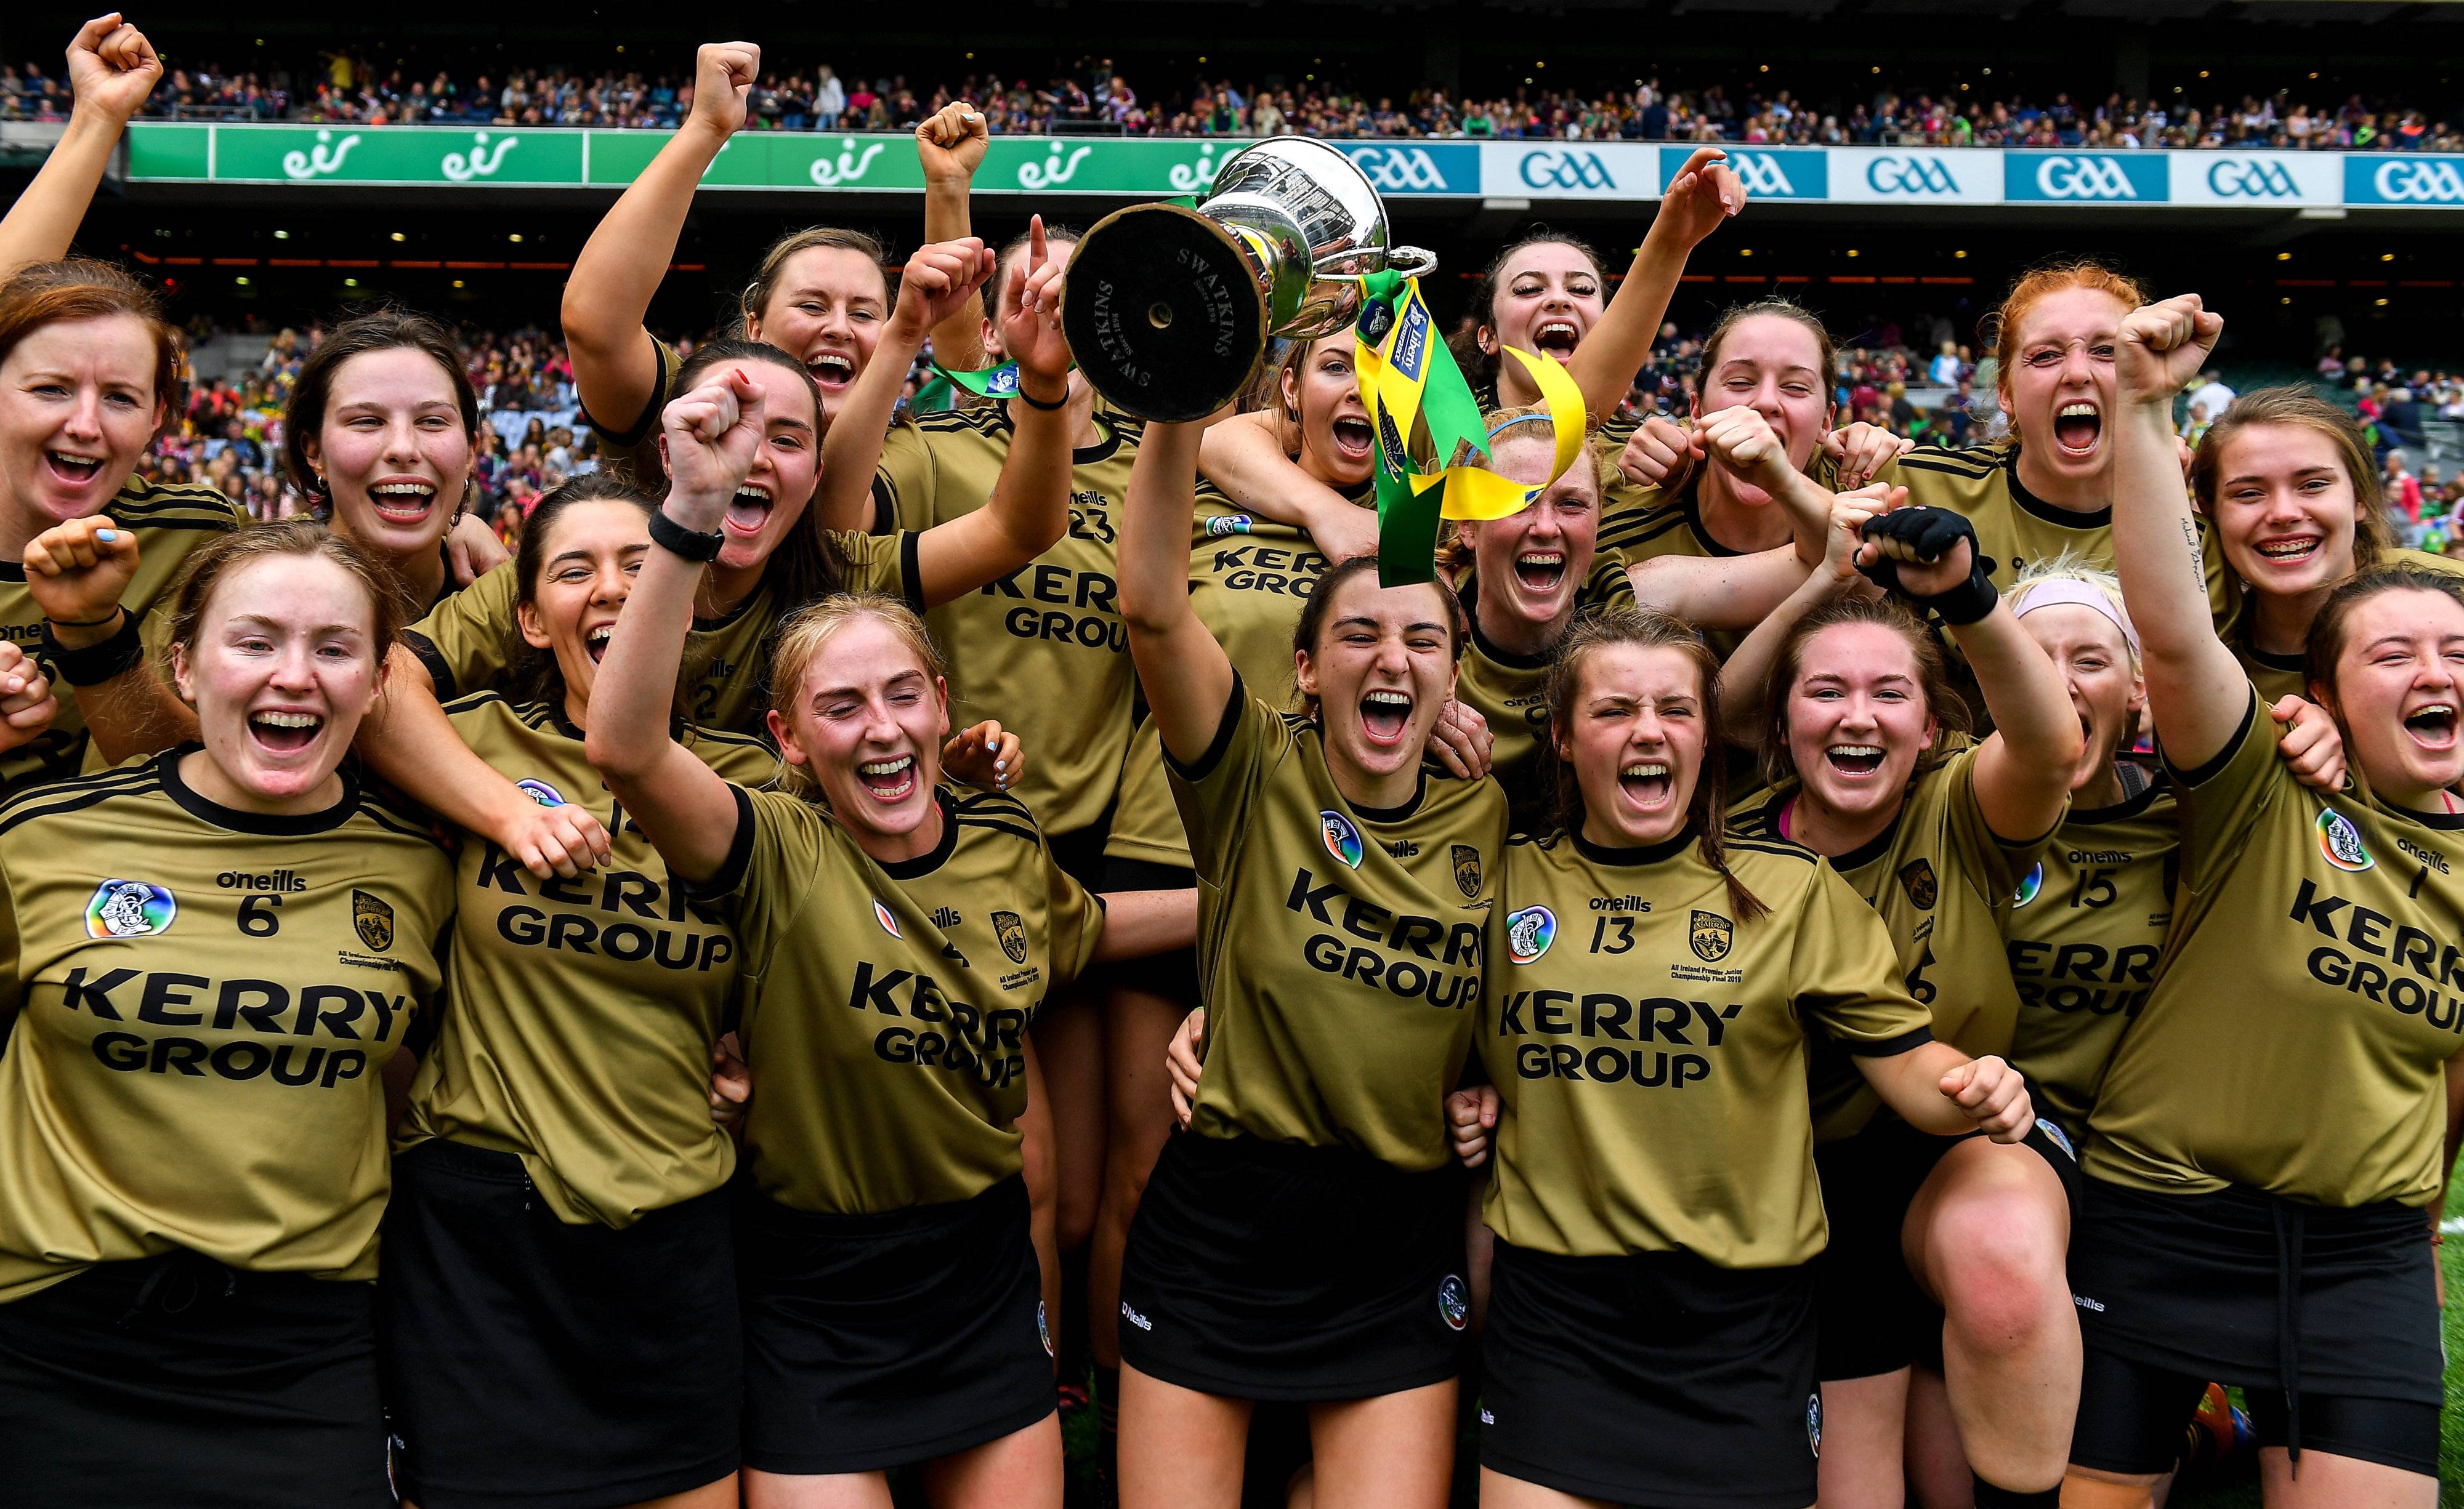 Congrats to Pharmacy student, Aine O'Connor, and the Kerry Camogie team on winning the 2019 All-Ireland Premier Junior Camogie final yesterday! 